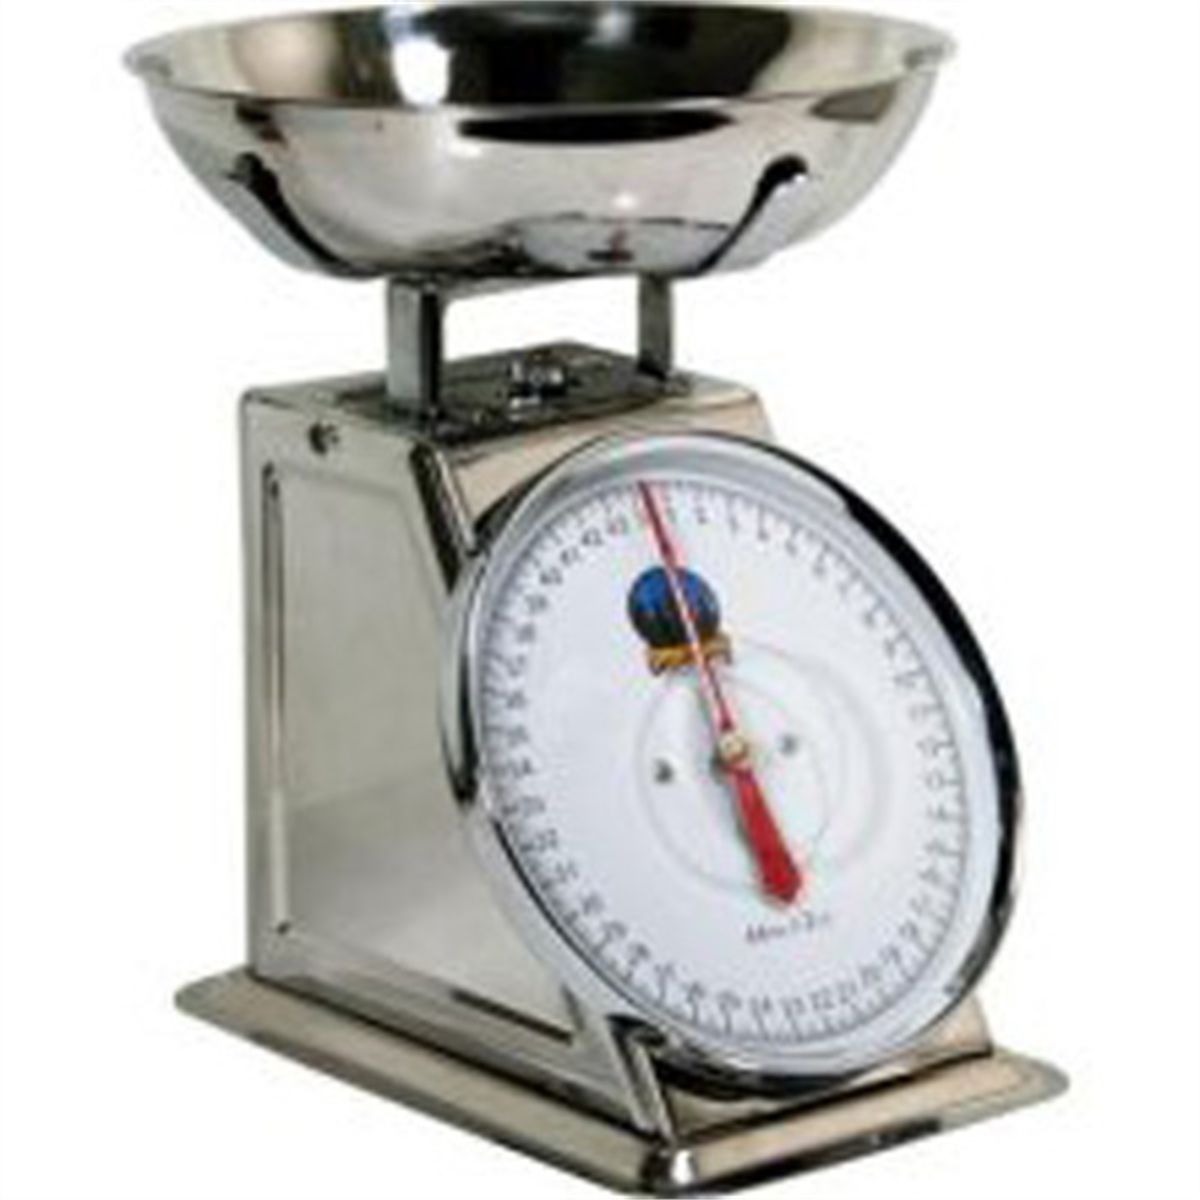 Kitchener Stainless Steel Scale With Dial - Up To 44 Lbs.